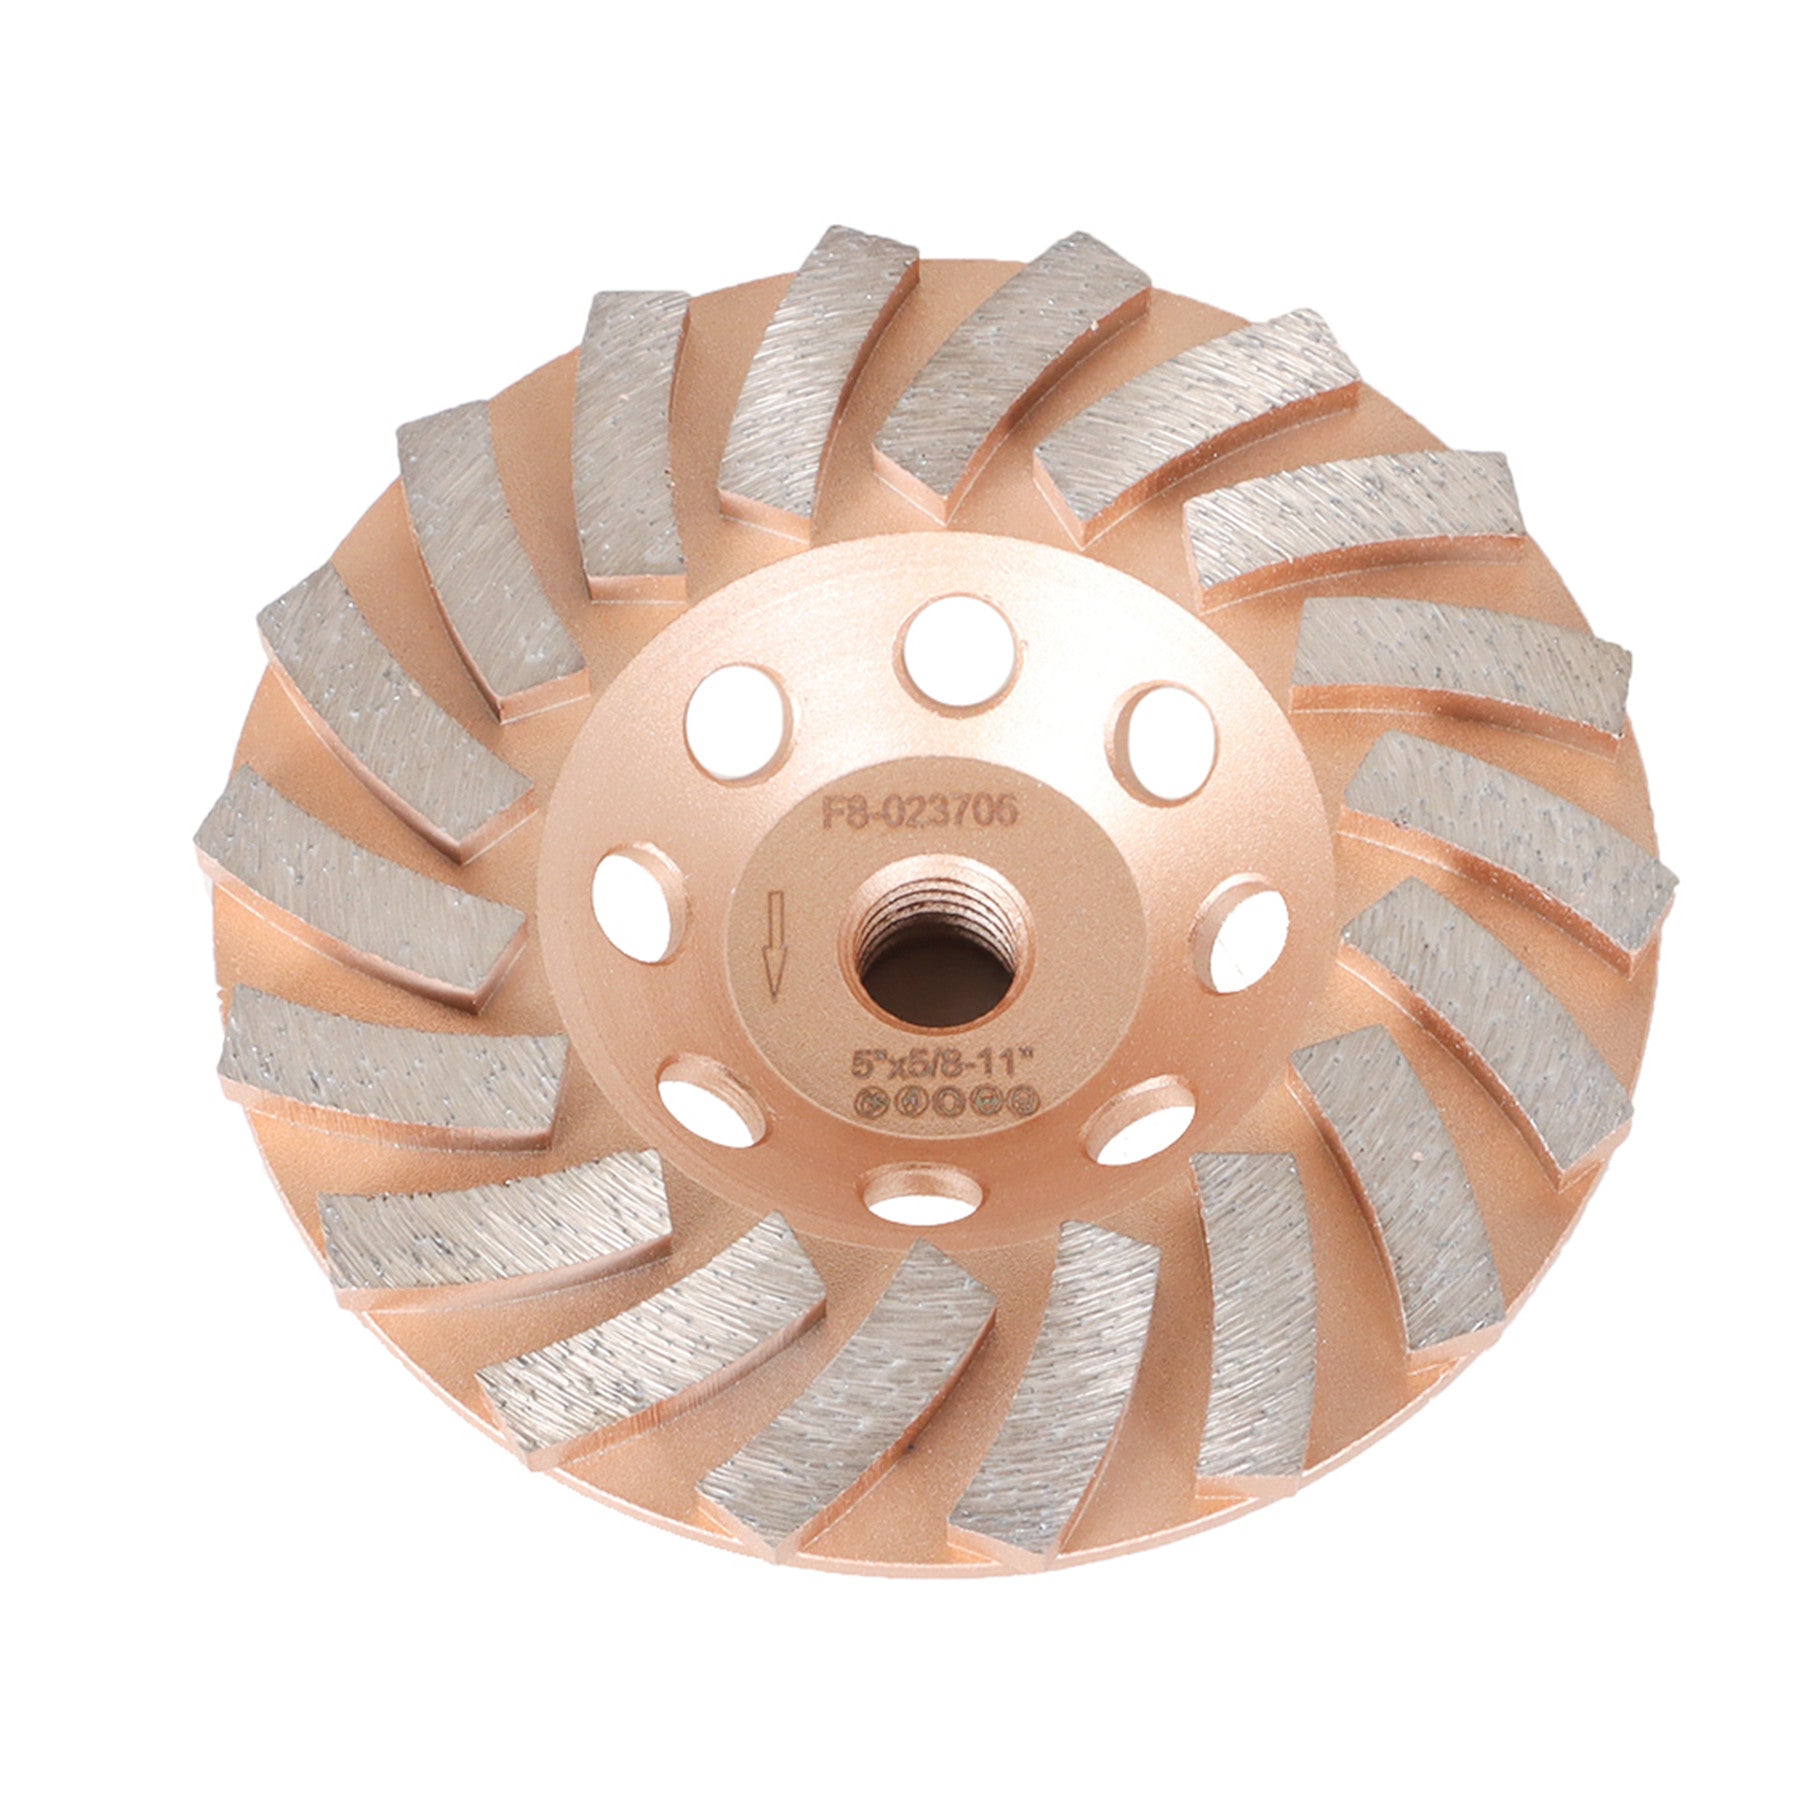 findmall  5 Inch 18 Turbo Diamond Segments 5/8 Inch -11 Arbor Grinding Wheels Diamond Cup Grinding Wheels Fit for Concrete and Masonry Available FINDMALLPARTS